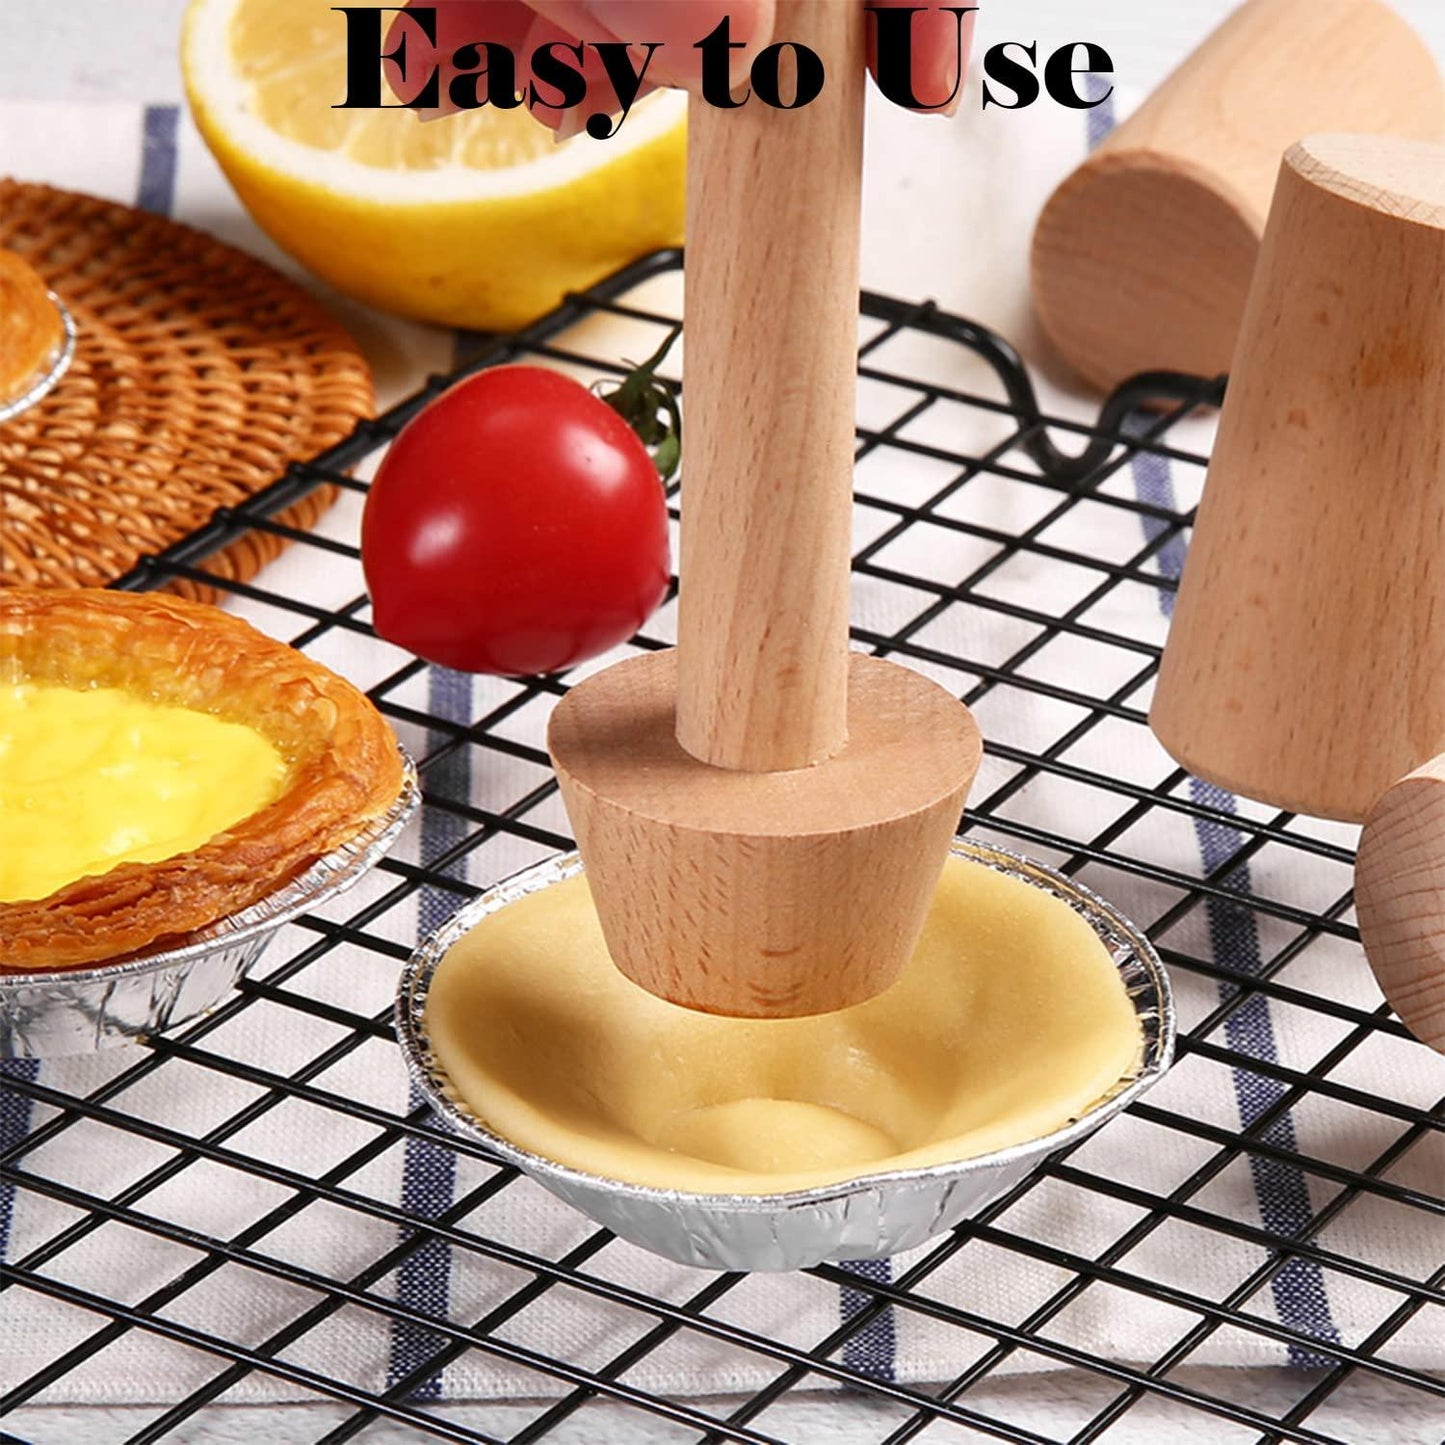 Dupiulk Wooden Tart Tamper Set, Double Side Pie Pastry Dough Tamper, Egg Tart Pan Mold DIY Cake Pastry Baking Tool for Mini Egg Tart, Cheesecakes, Pasta and Dessert Baking (3 Pieces) - CookCave